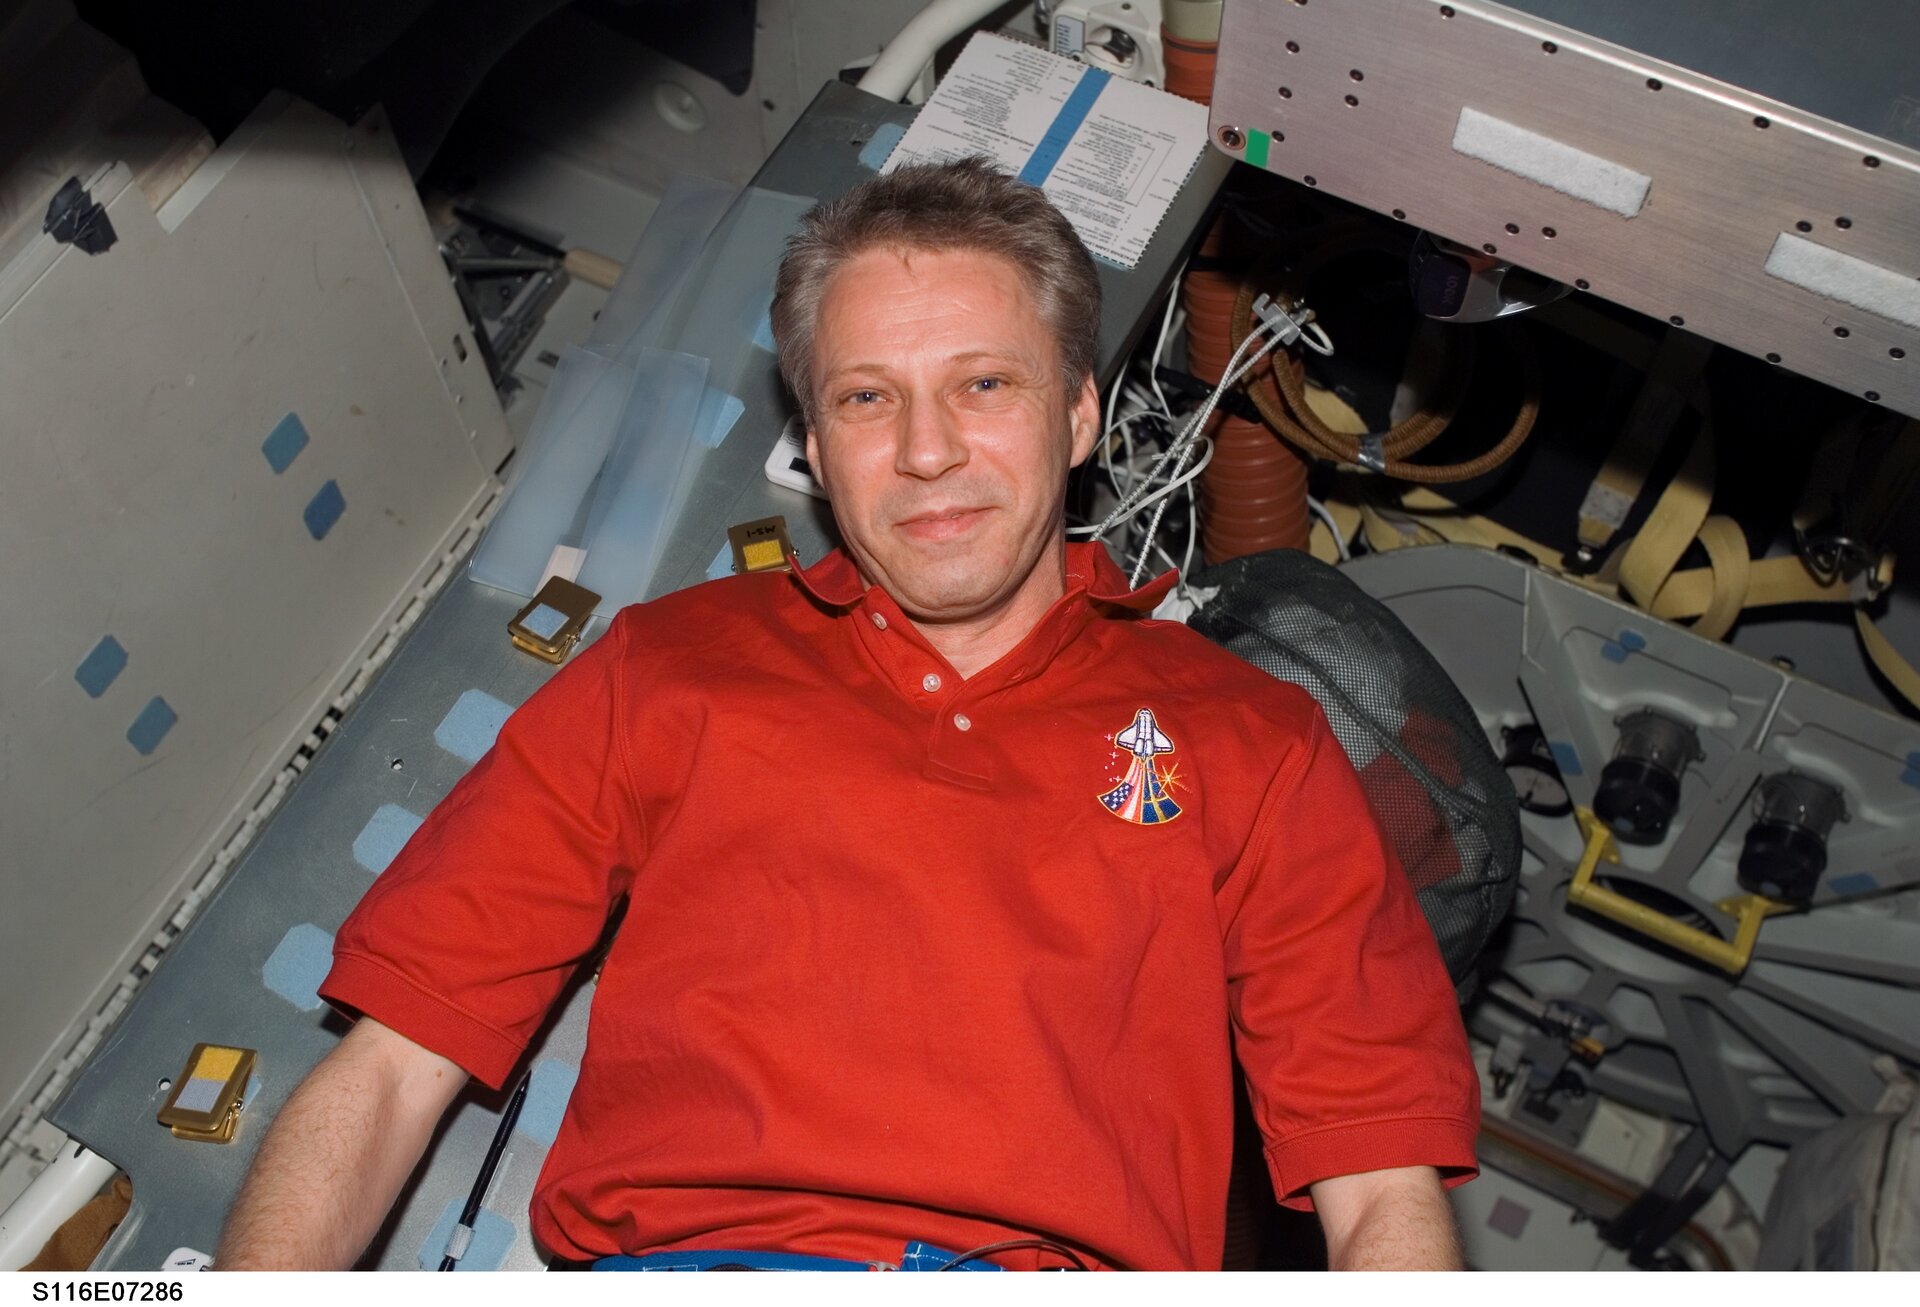 Thomas Reiter took part in the first long-duration mission on the ISS